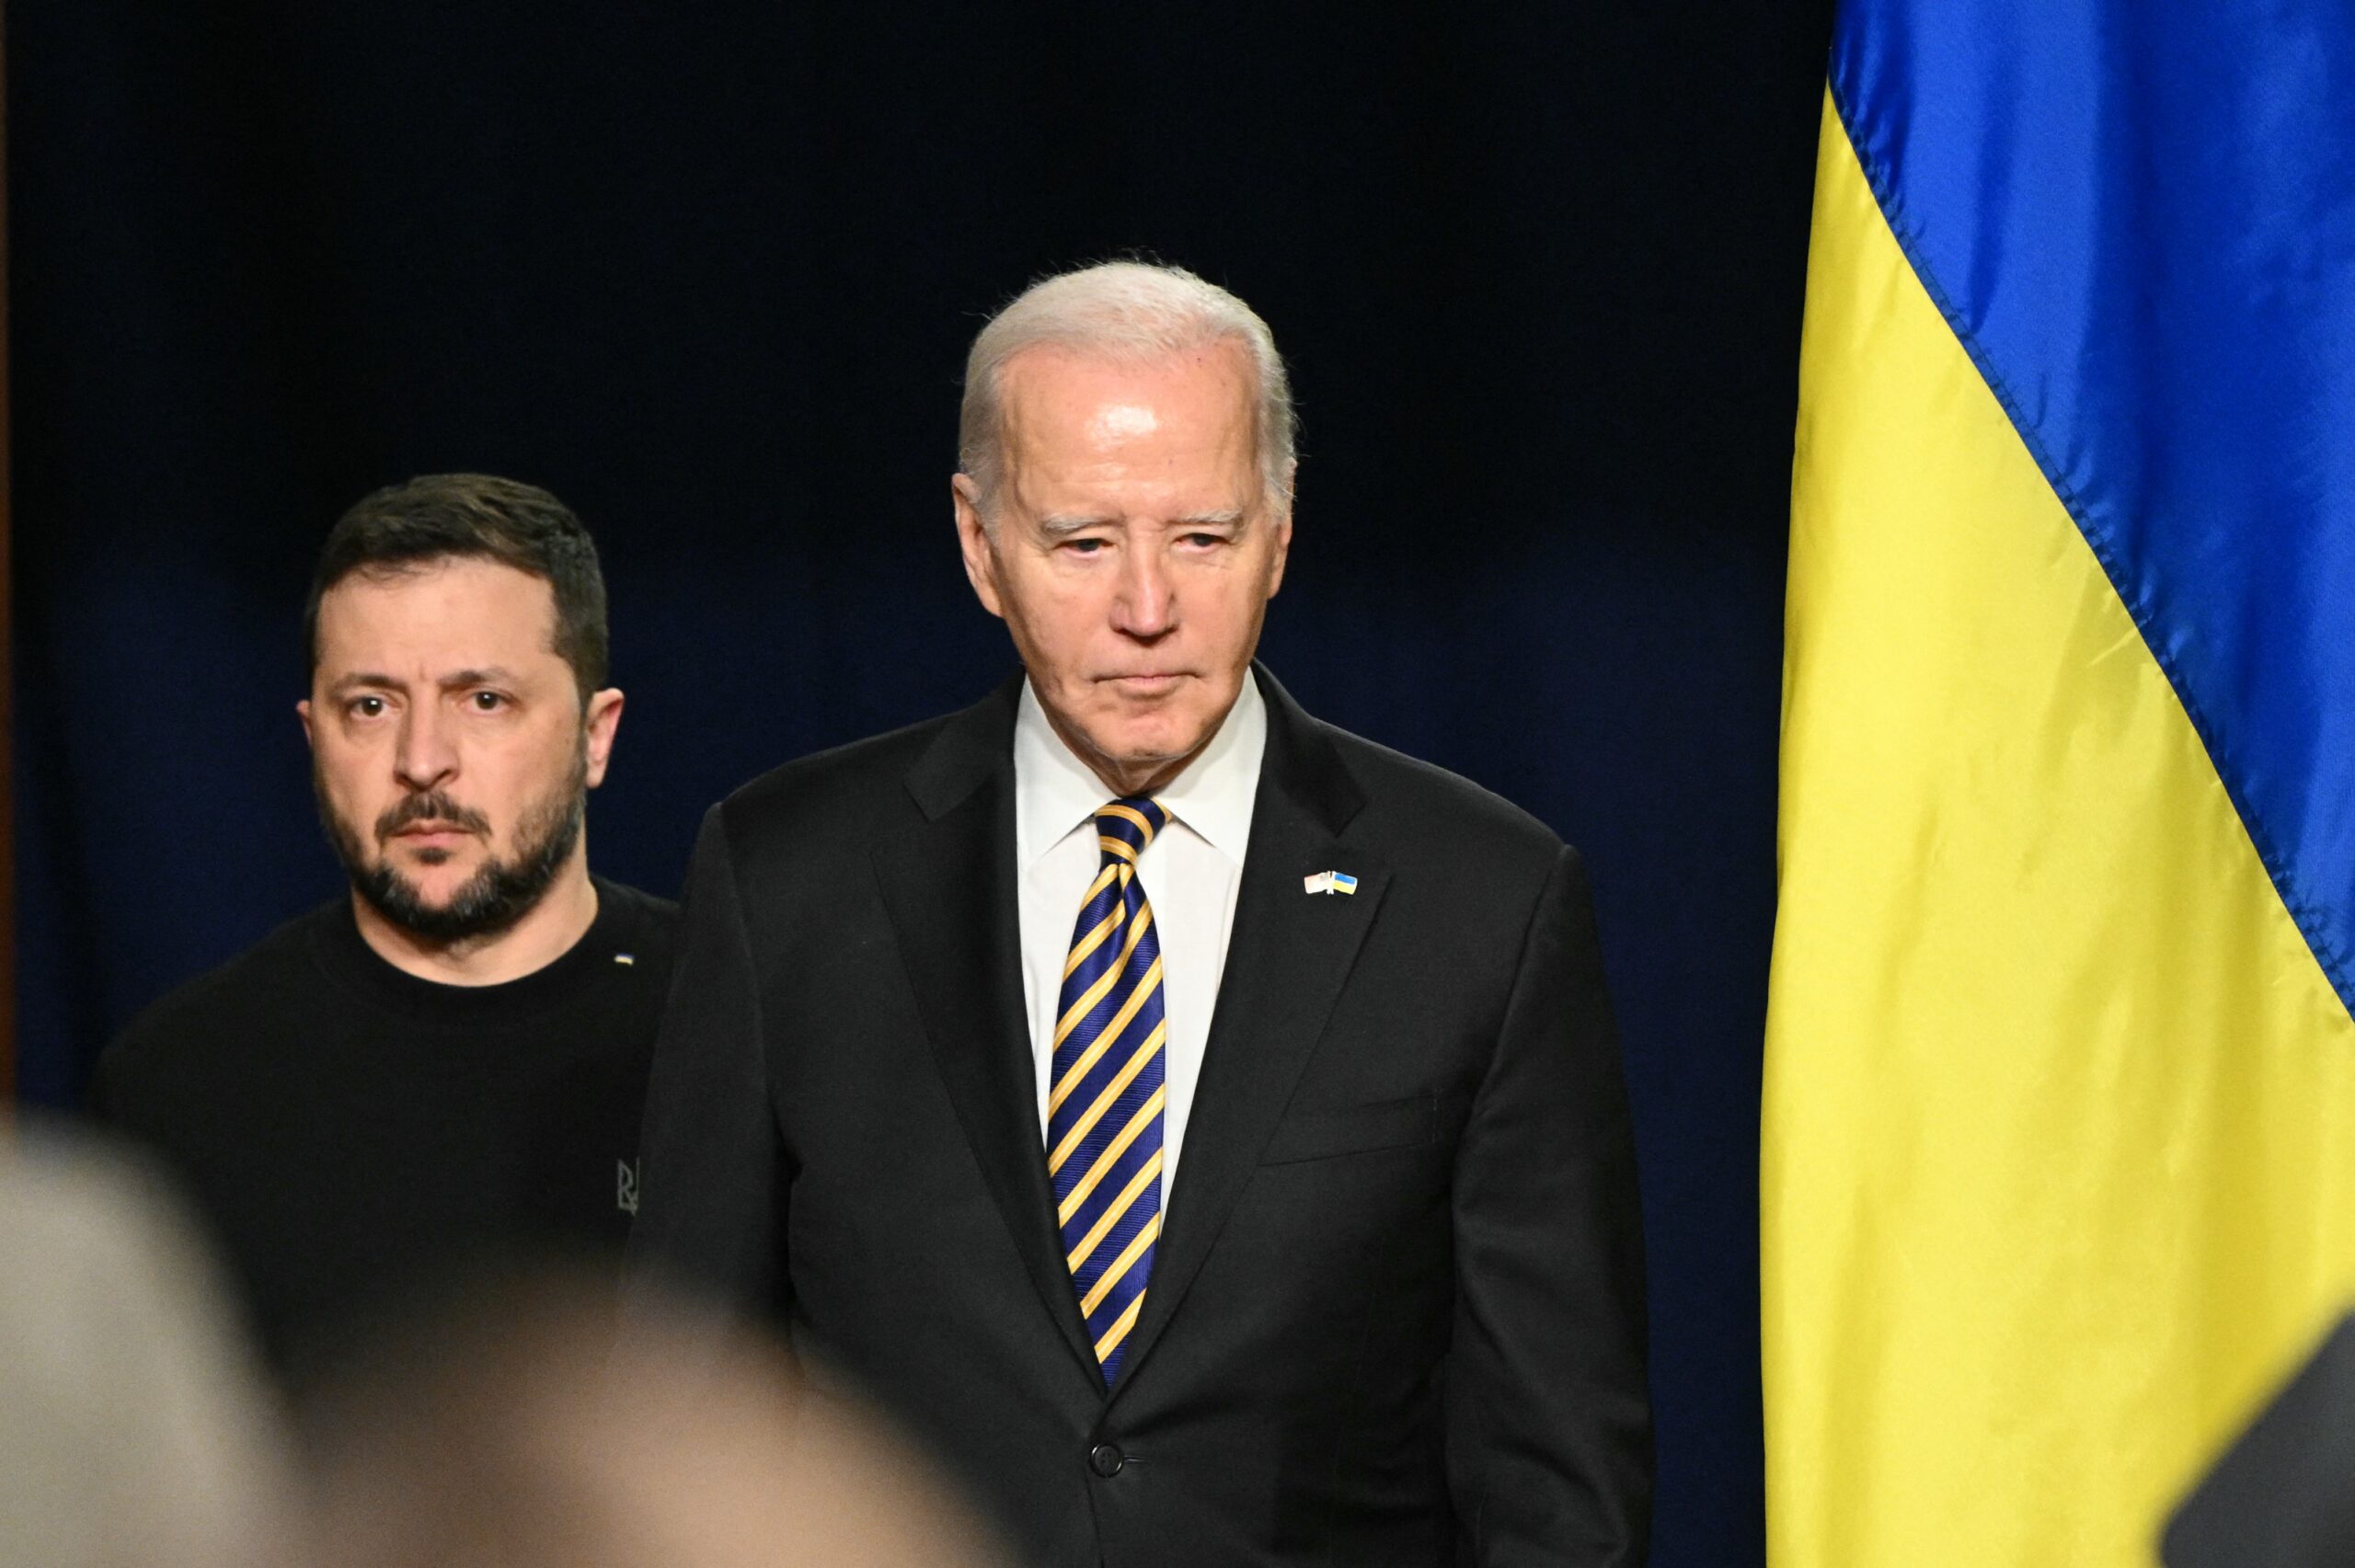 Biden to meet with Zelensky in France, at G7 in Italy